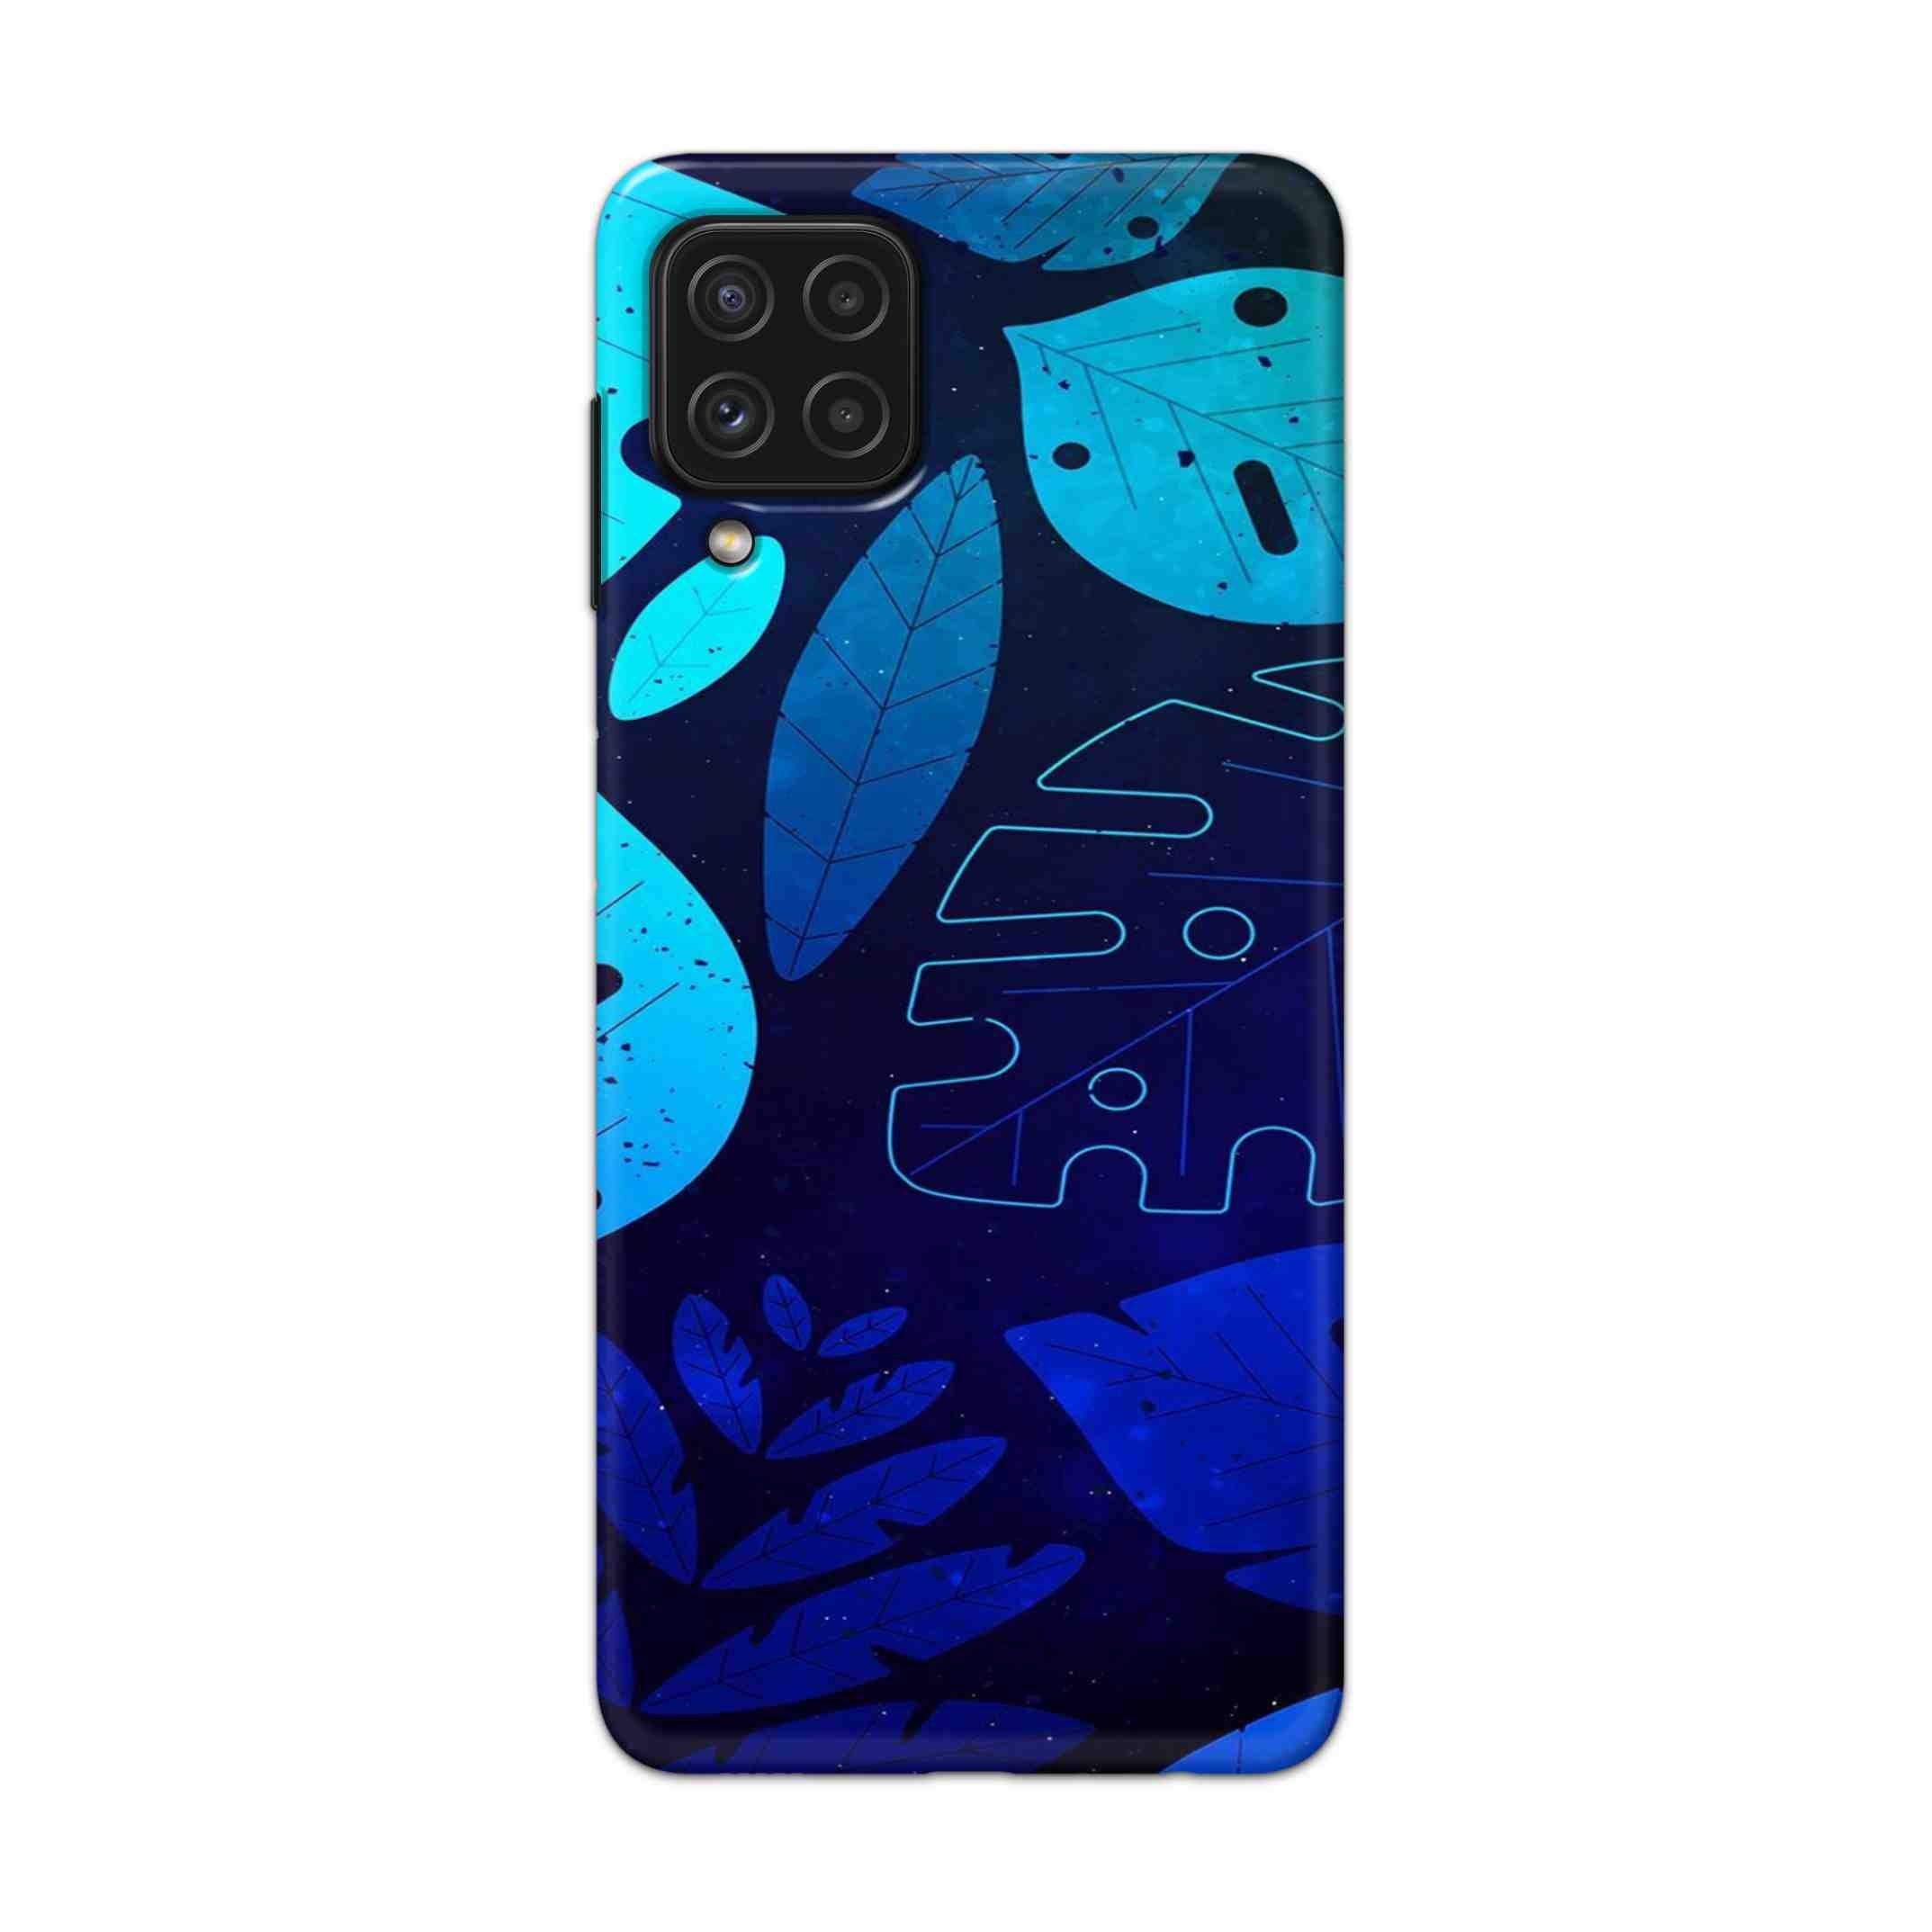 Buy Neon Leaf Hard Back Mobile Phone Case Cover For Samsung Galaxy A22 Online